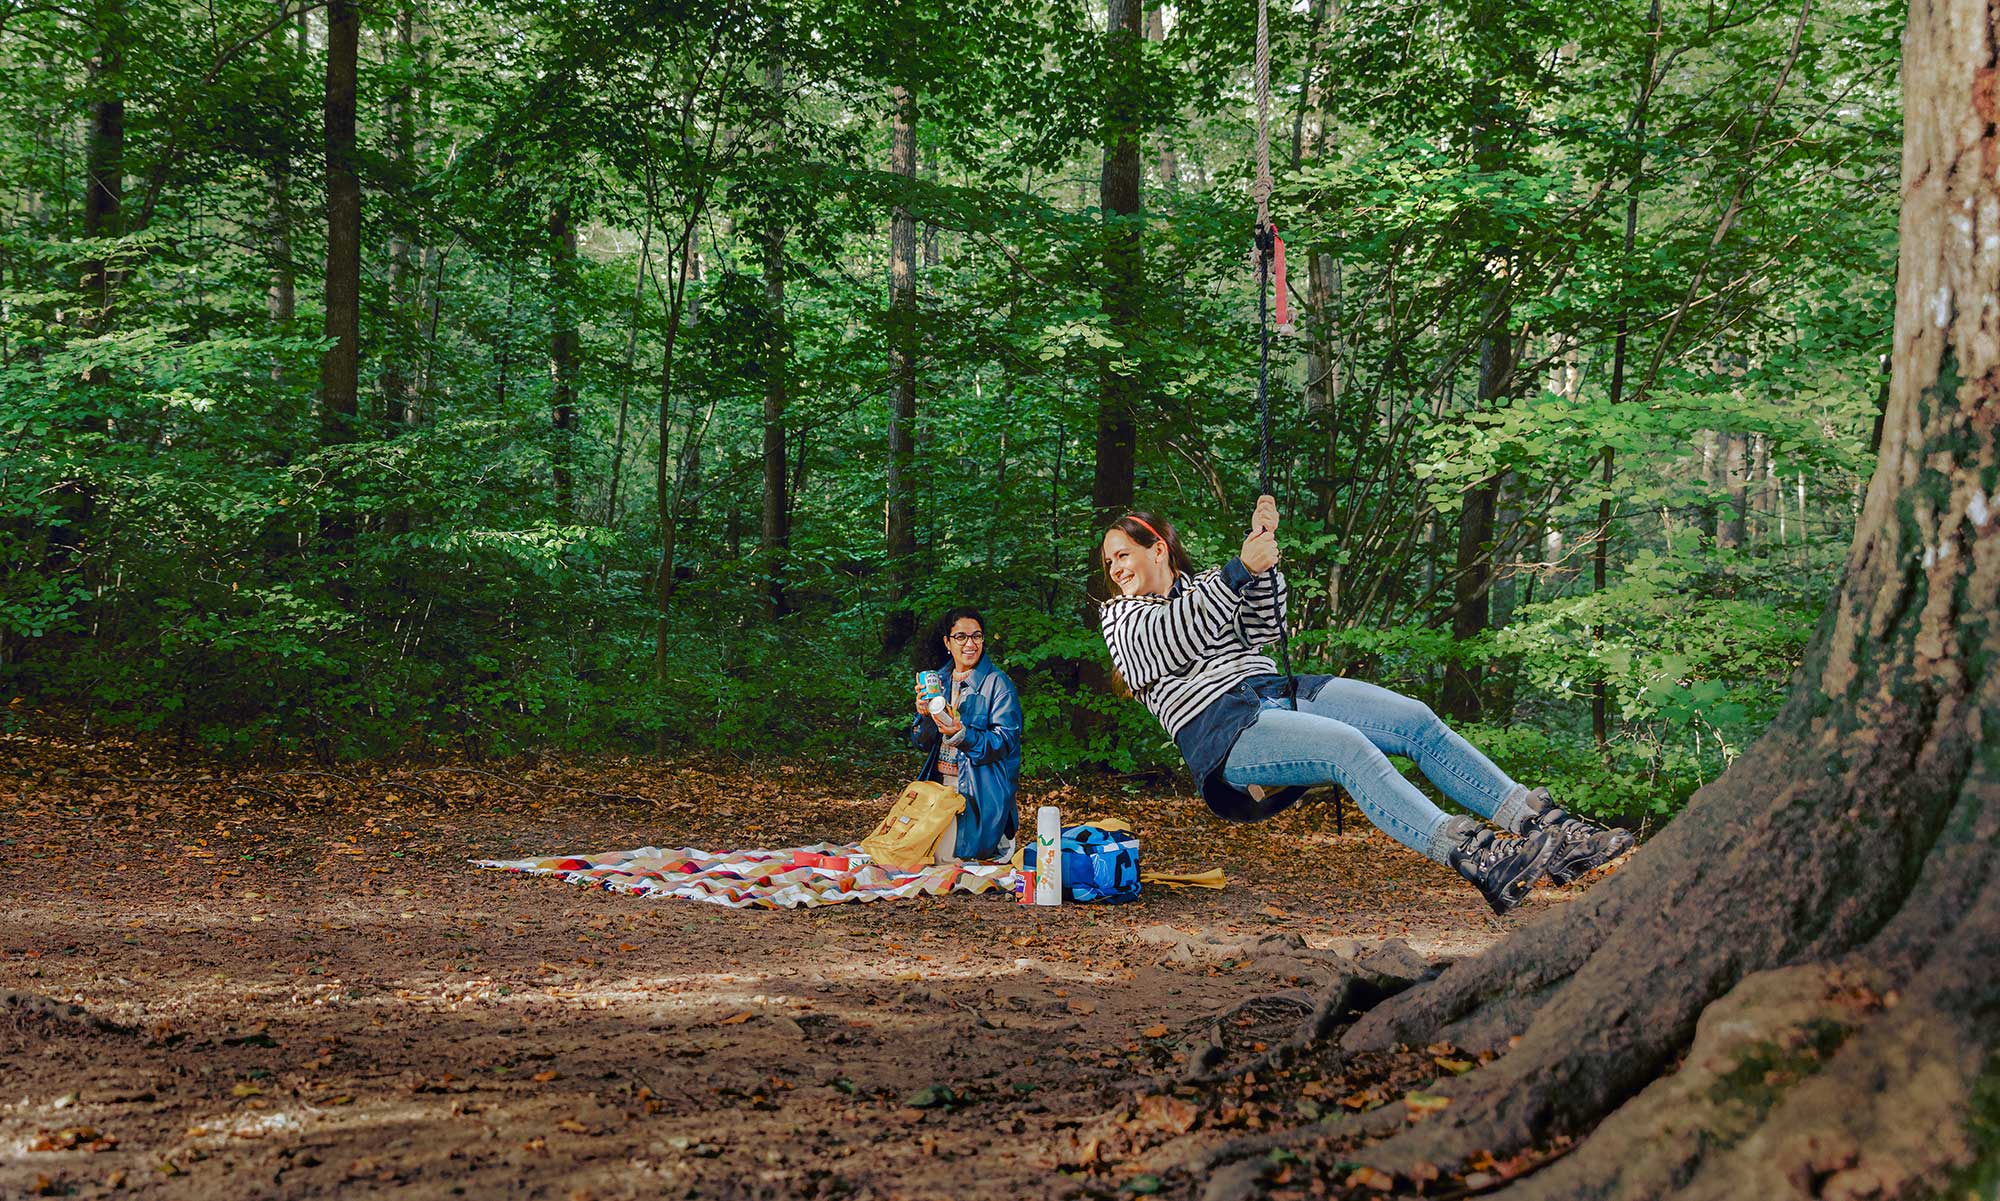 Two girls in the forest, one girl sitting at a swing.